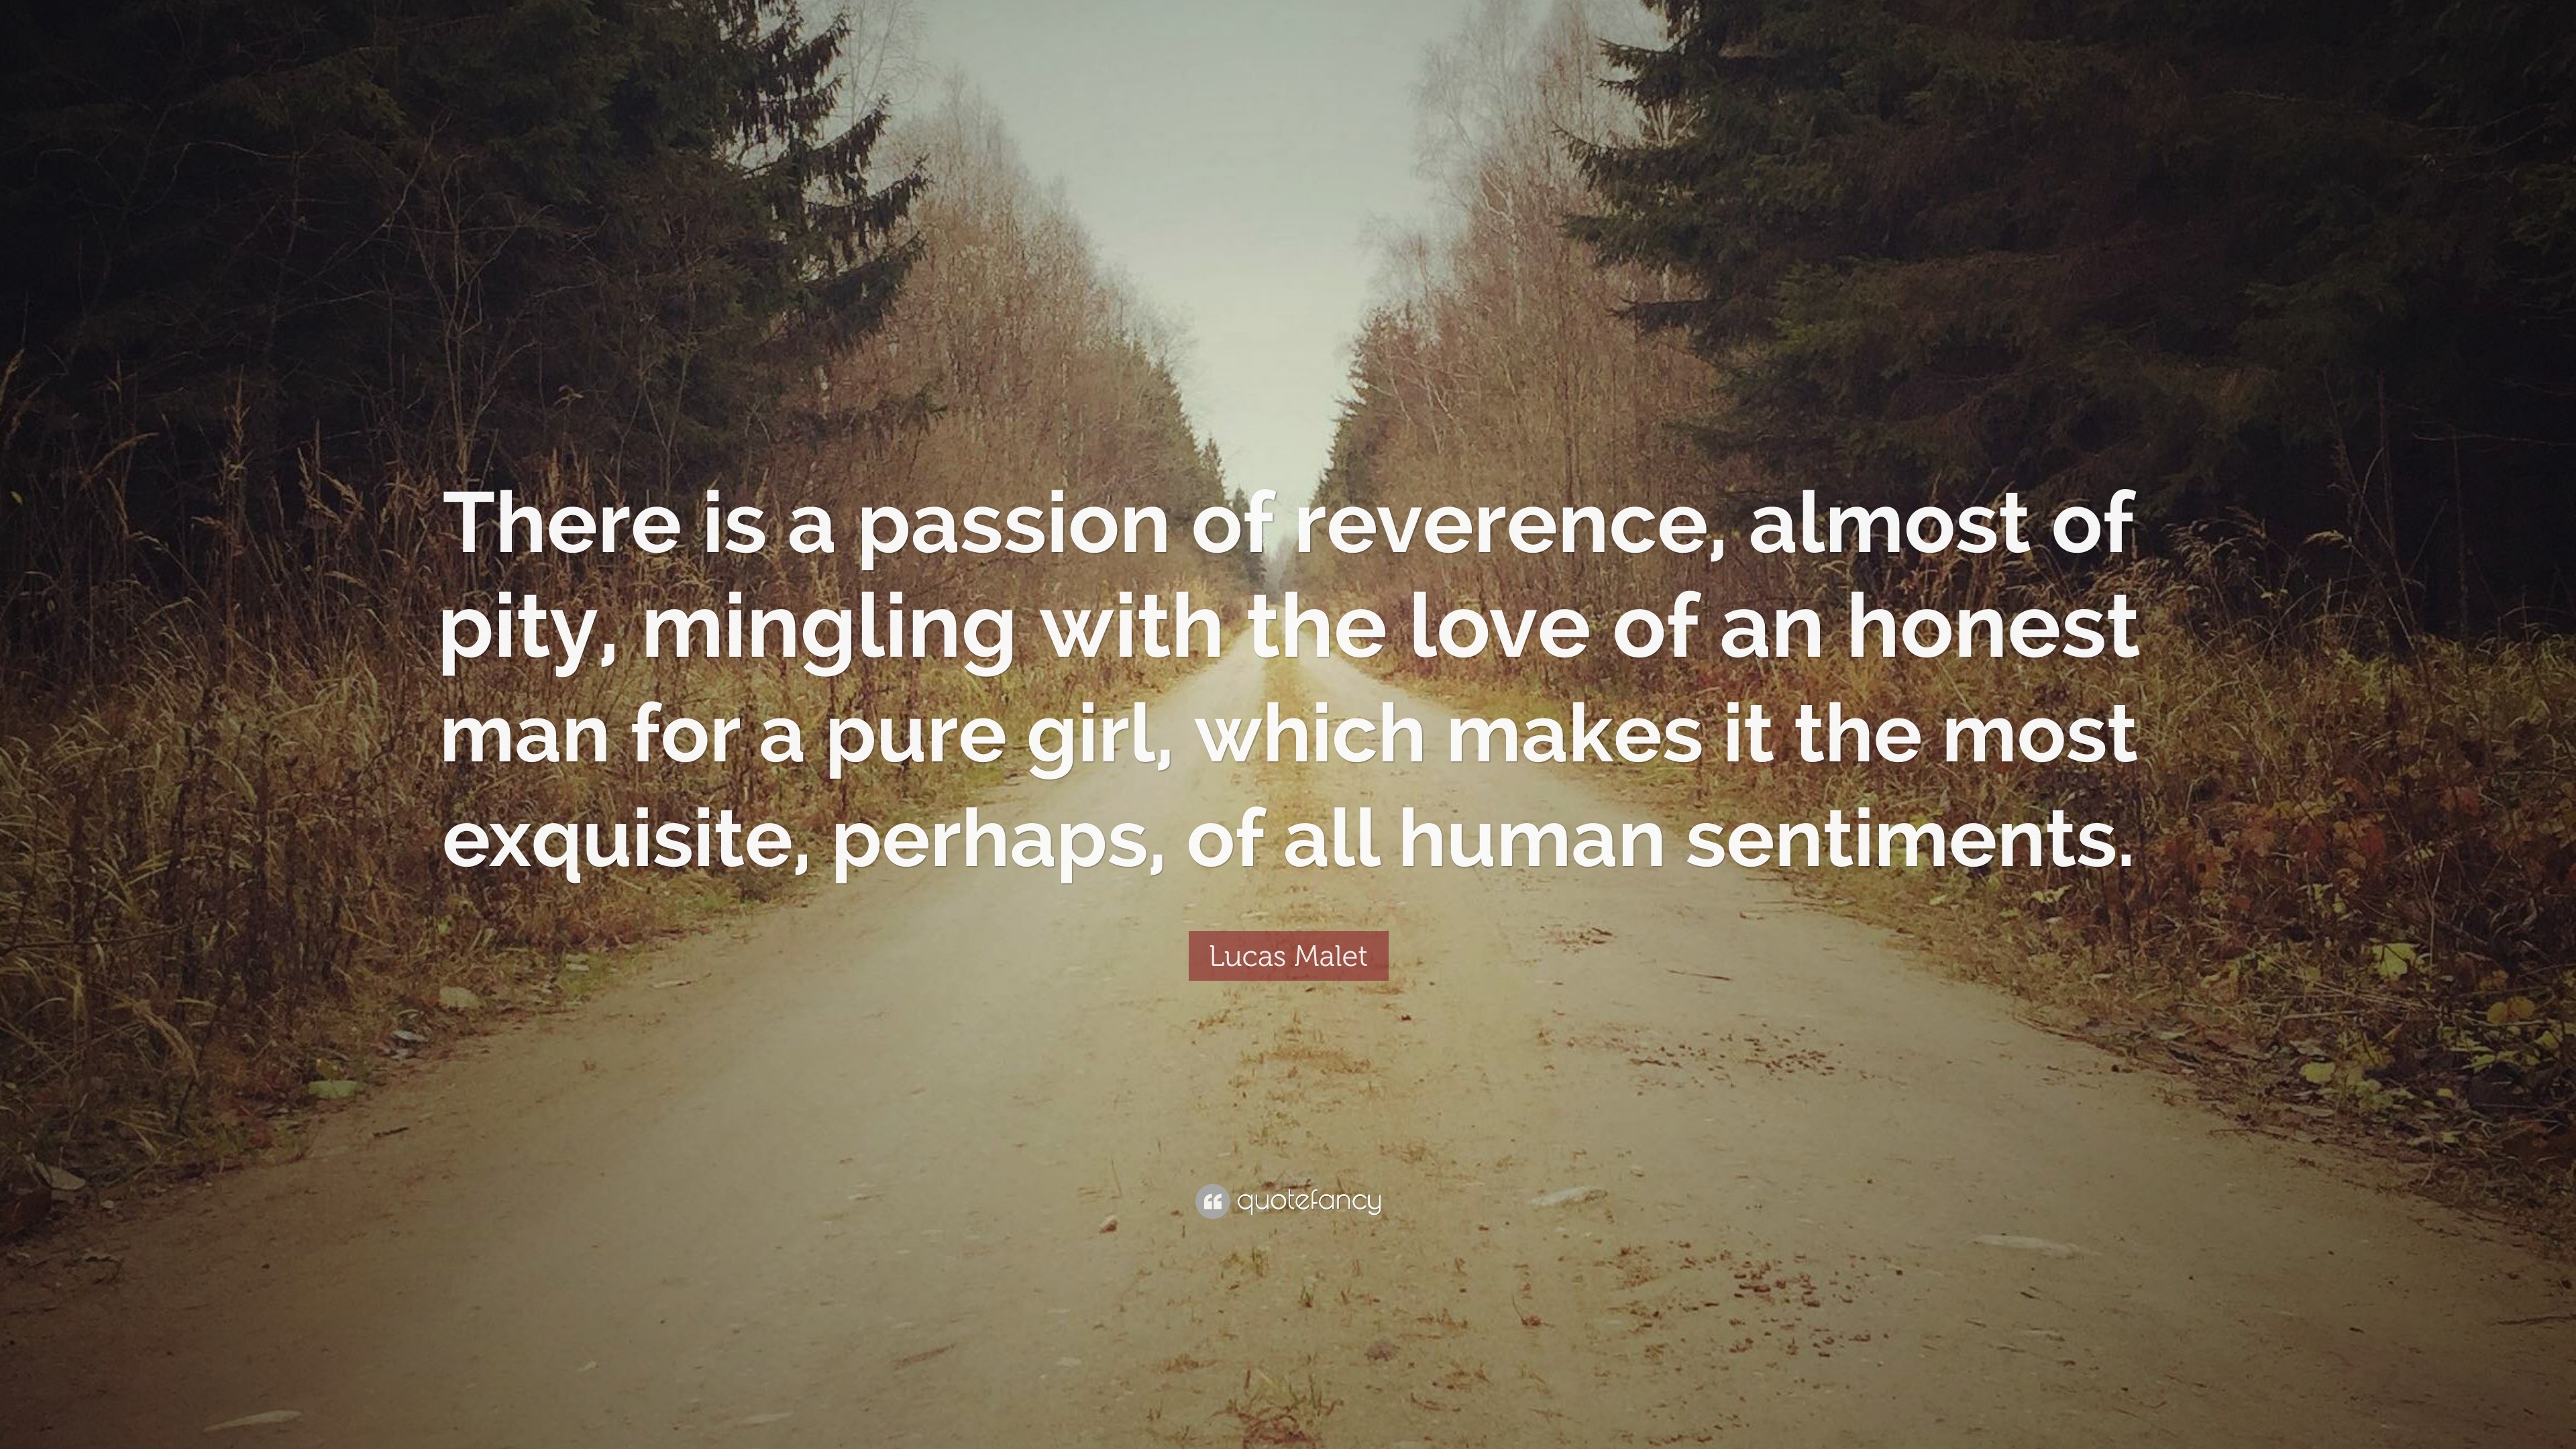 Lucas Malet Quote: “There is a passion of reverence, almost of pity ...